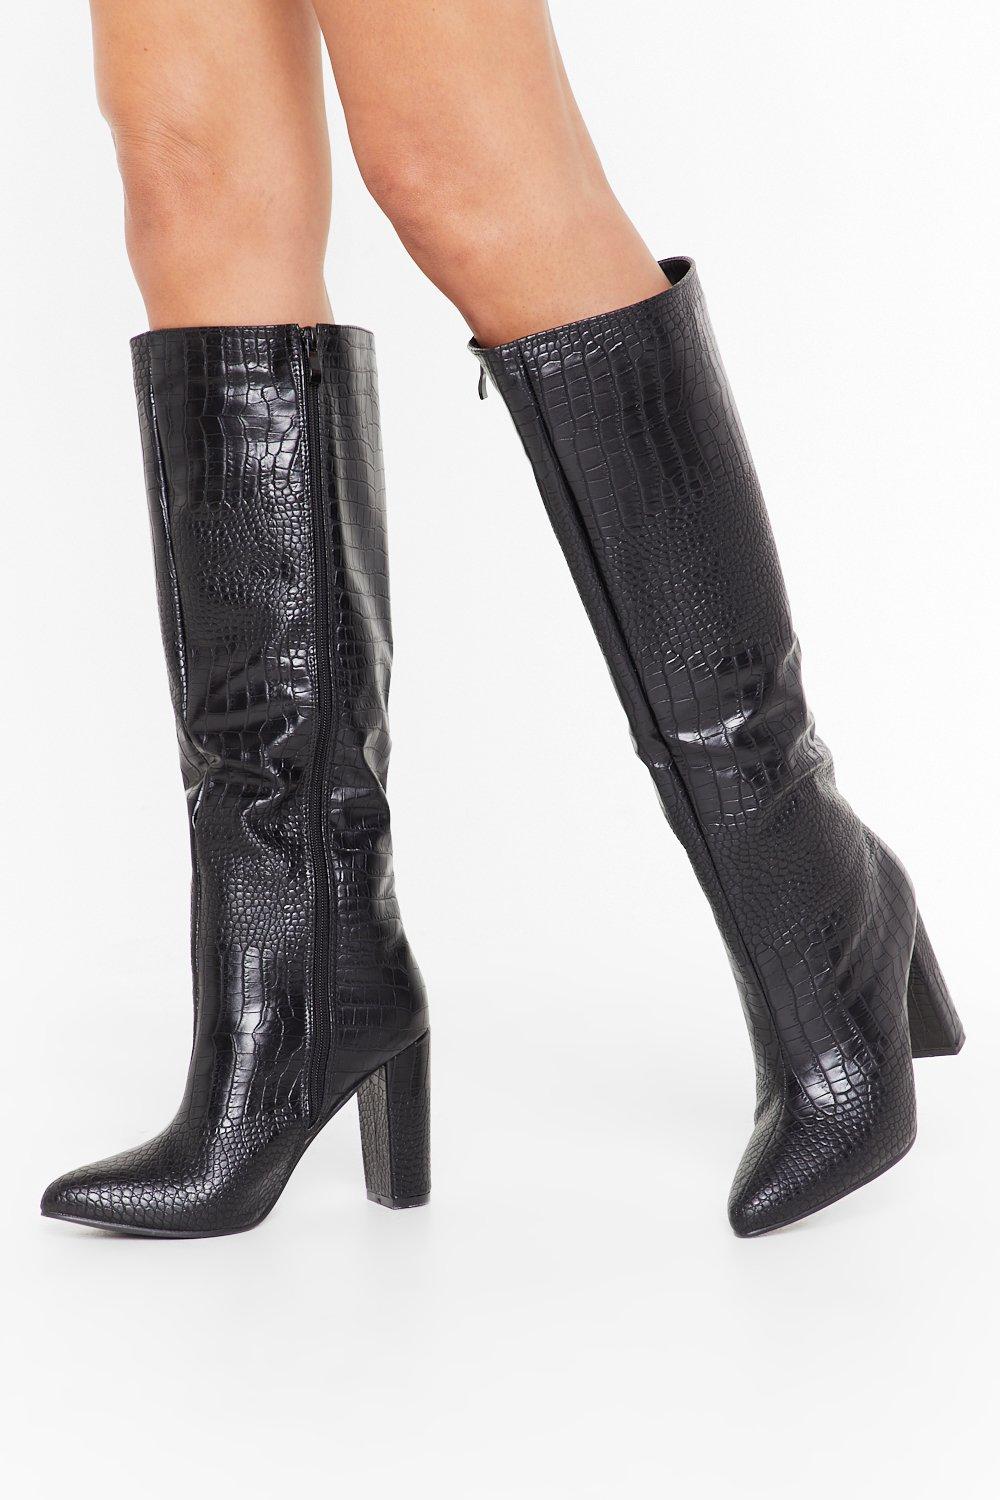 Croc Our World Faux Leather Knee-High 